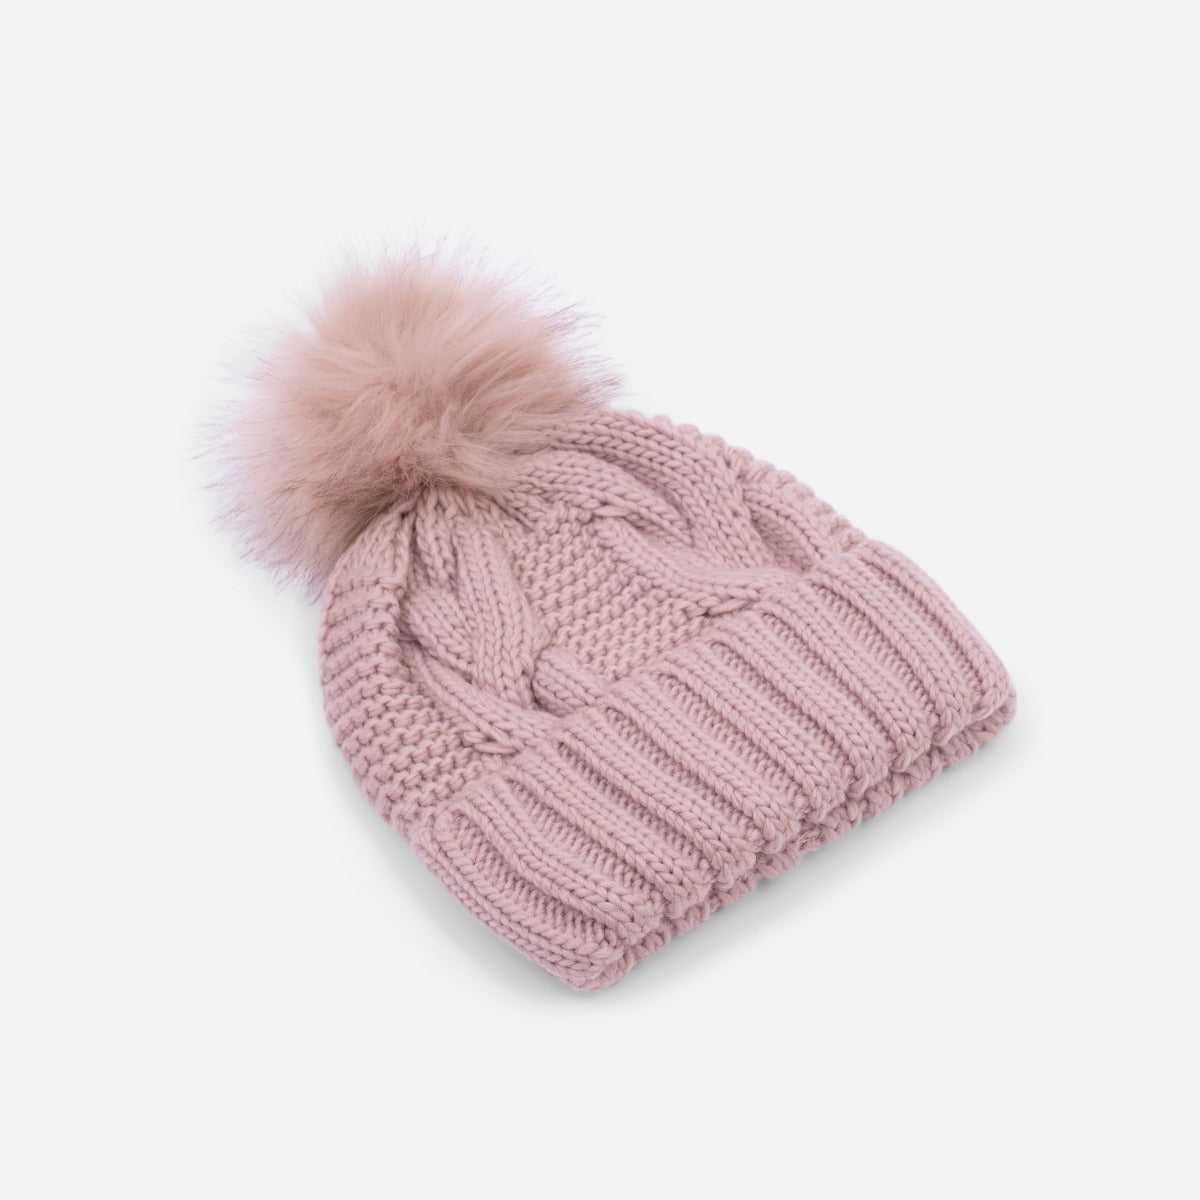 Dusty pink knit beanie with removable pompom